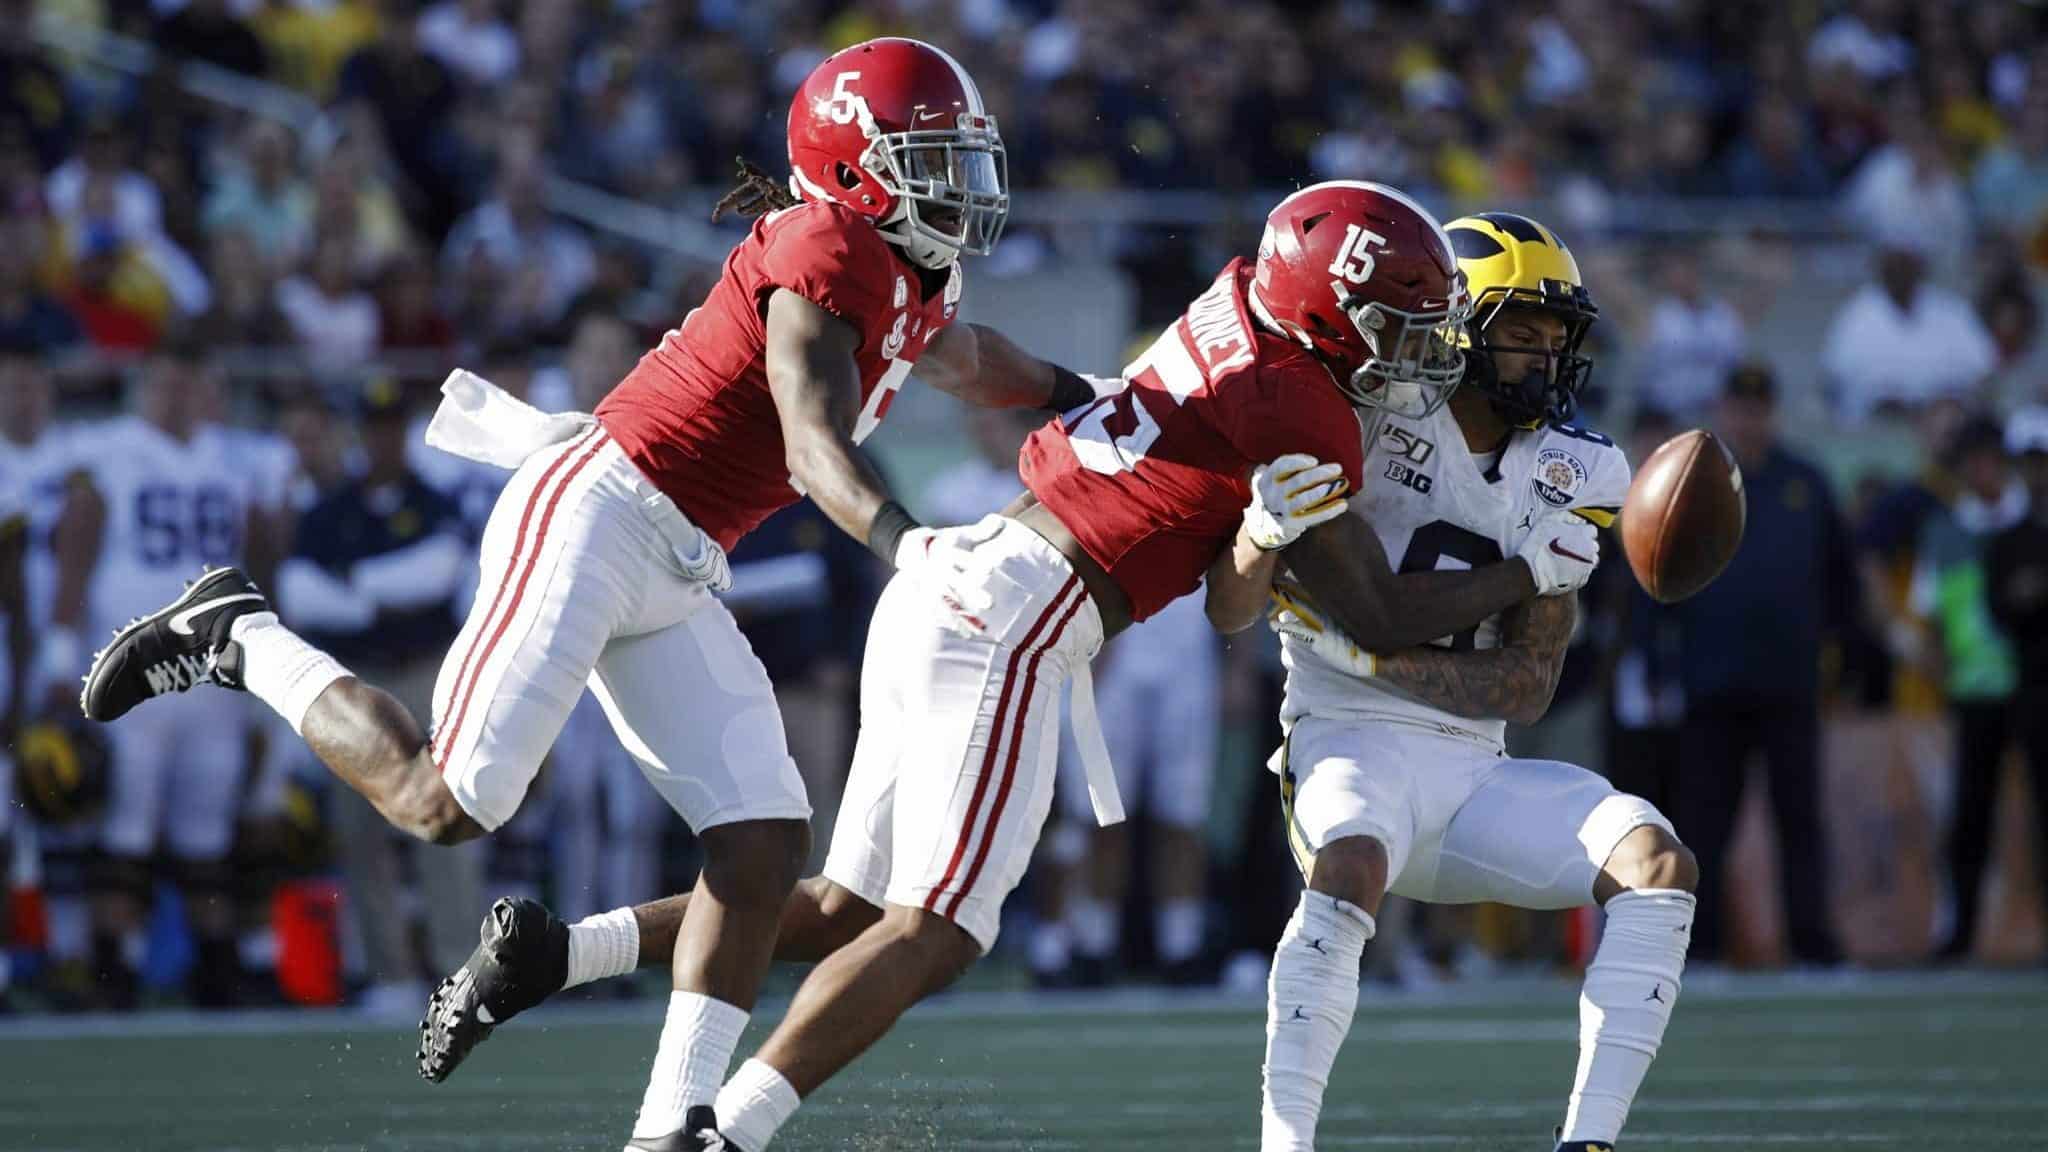 ORLANDO, FL - JANUARY 01: Xavier McKinney #15 and Shyheim Carter #5 of the Alabama Crimson Tide defend a pass against Ronnie Bell #8 of the Michigan Wolverines in the third quarter of the Vrbo Citrus Bowl at Camping World Stadium on January 1, 2020 in Orlando, Florida. Alabama defeated Michigan 35-16.